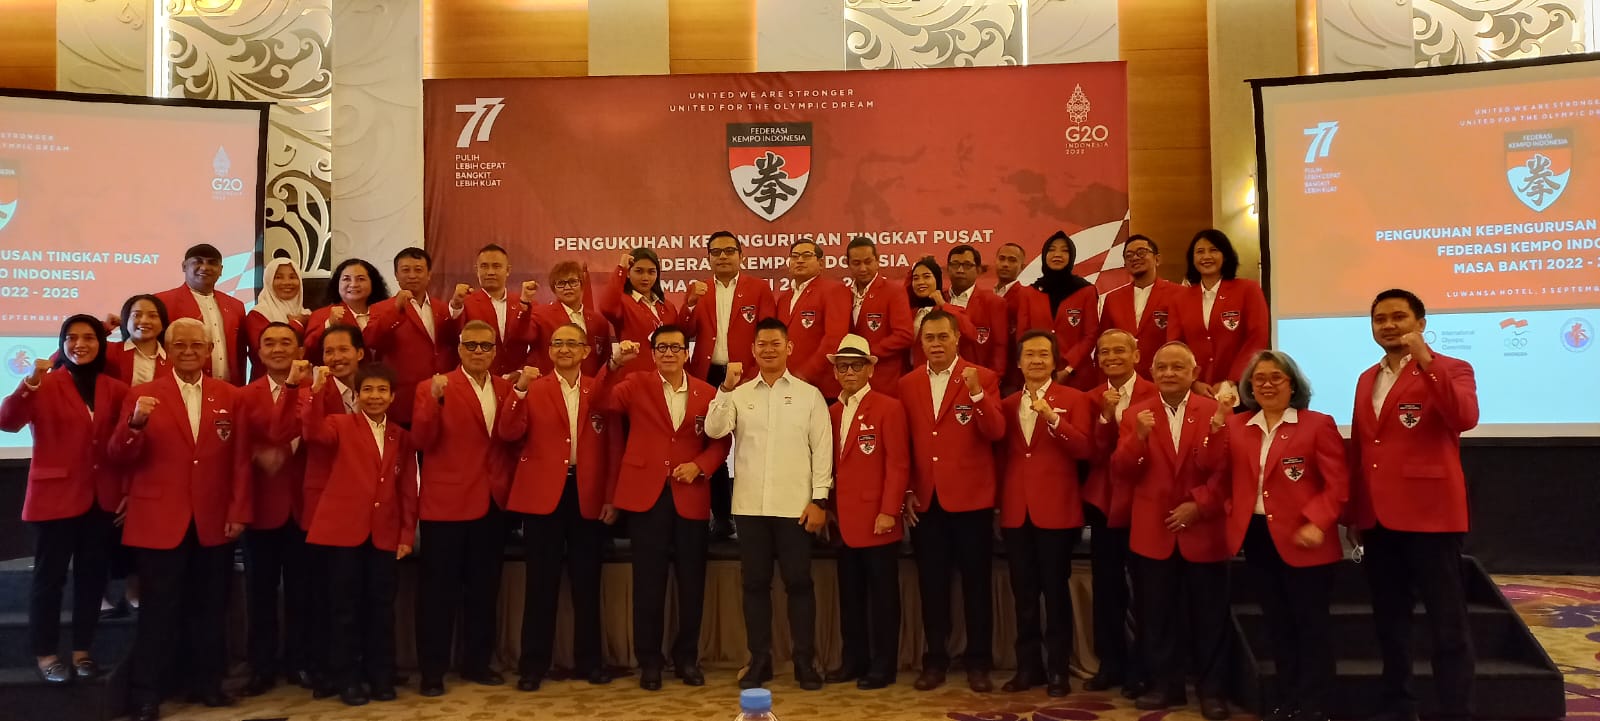 Indonesia Olympic Commitee - Kempo dreams of Olympic Inclusion